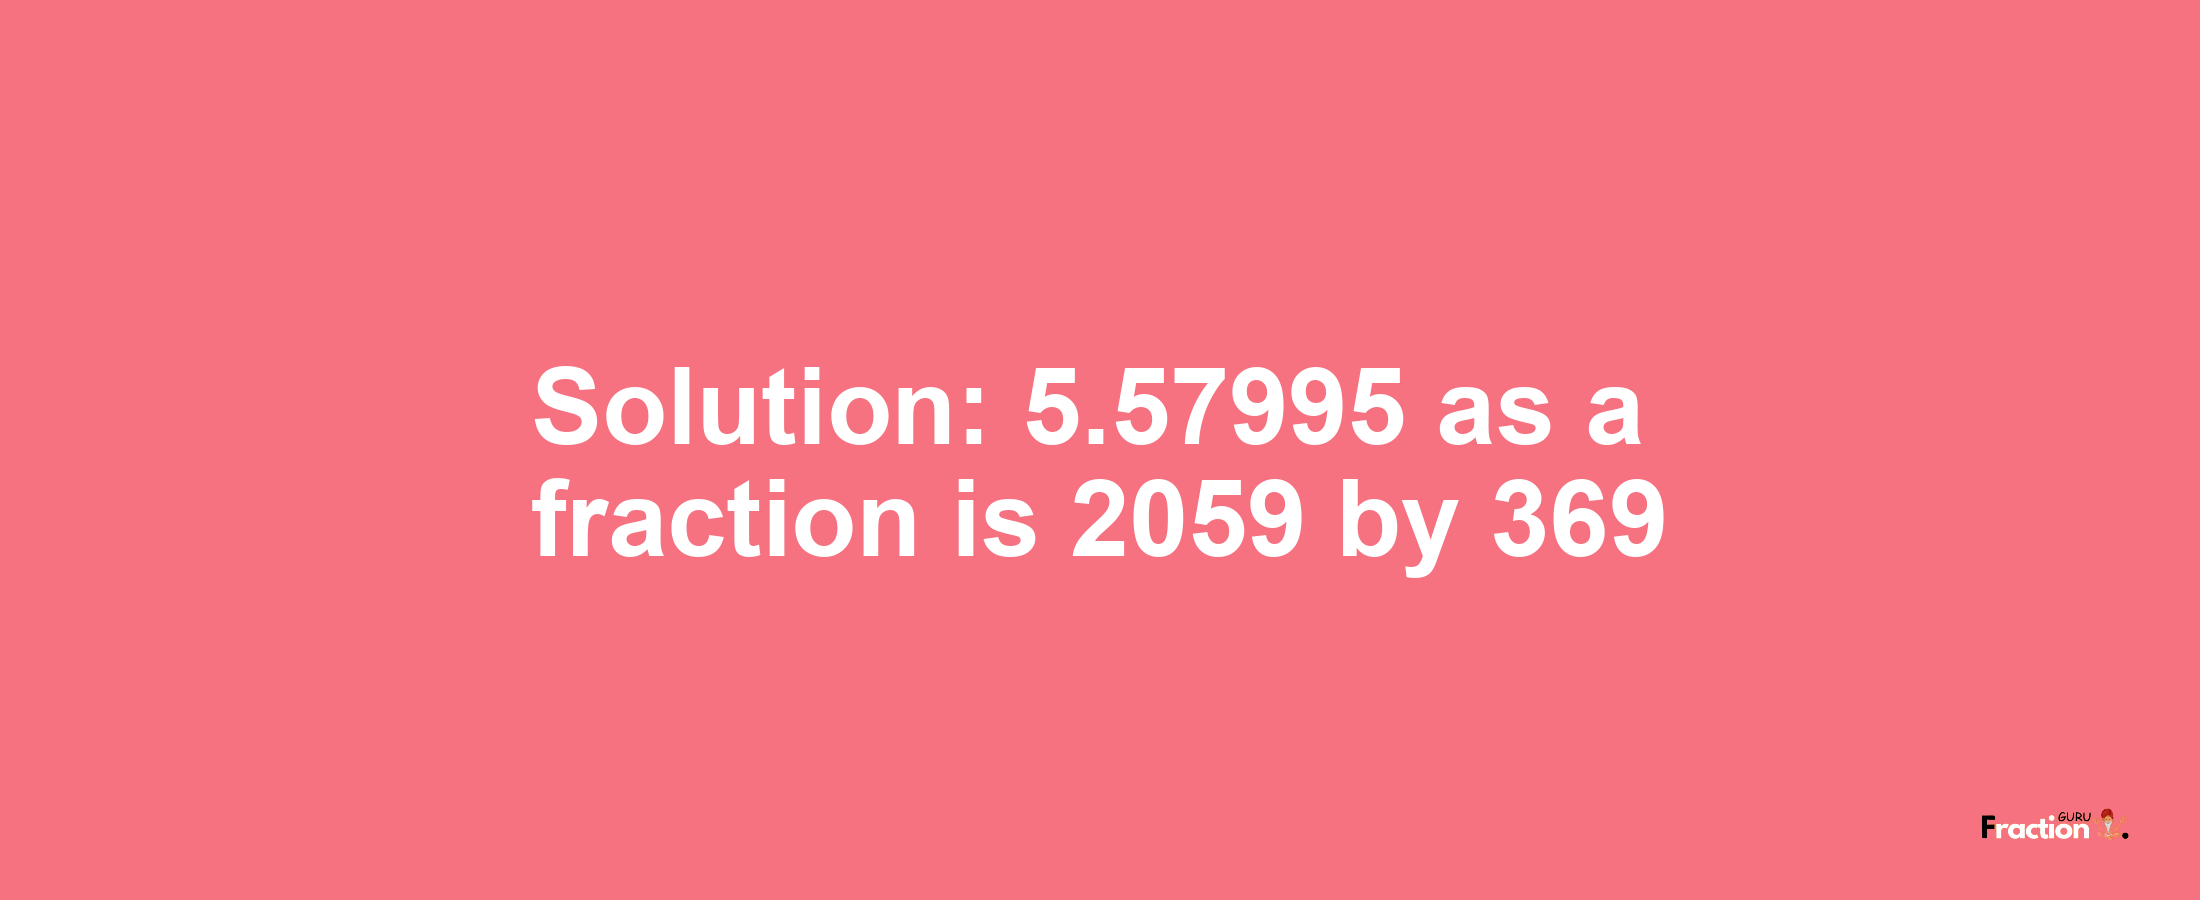 Solution:5.57995 as a fraction is 2059/369